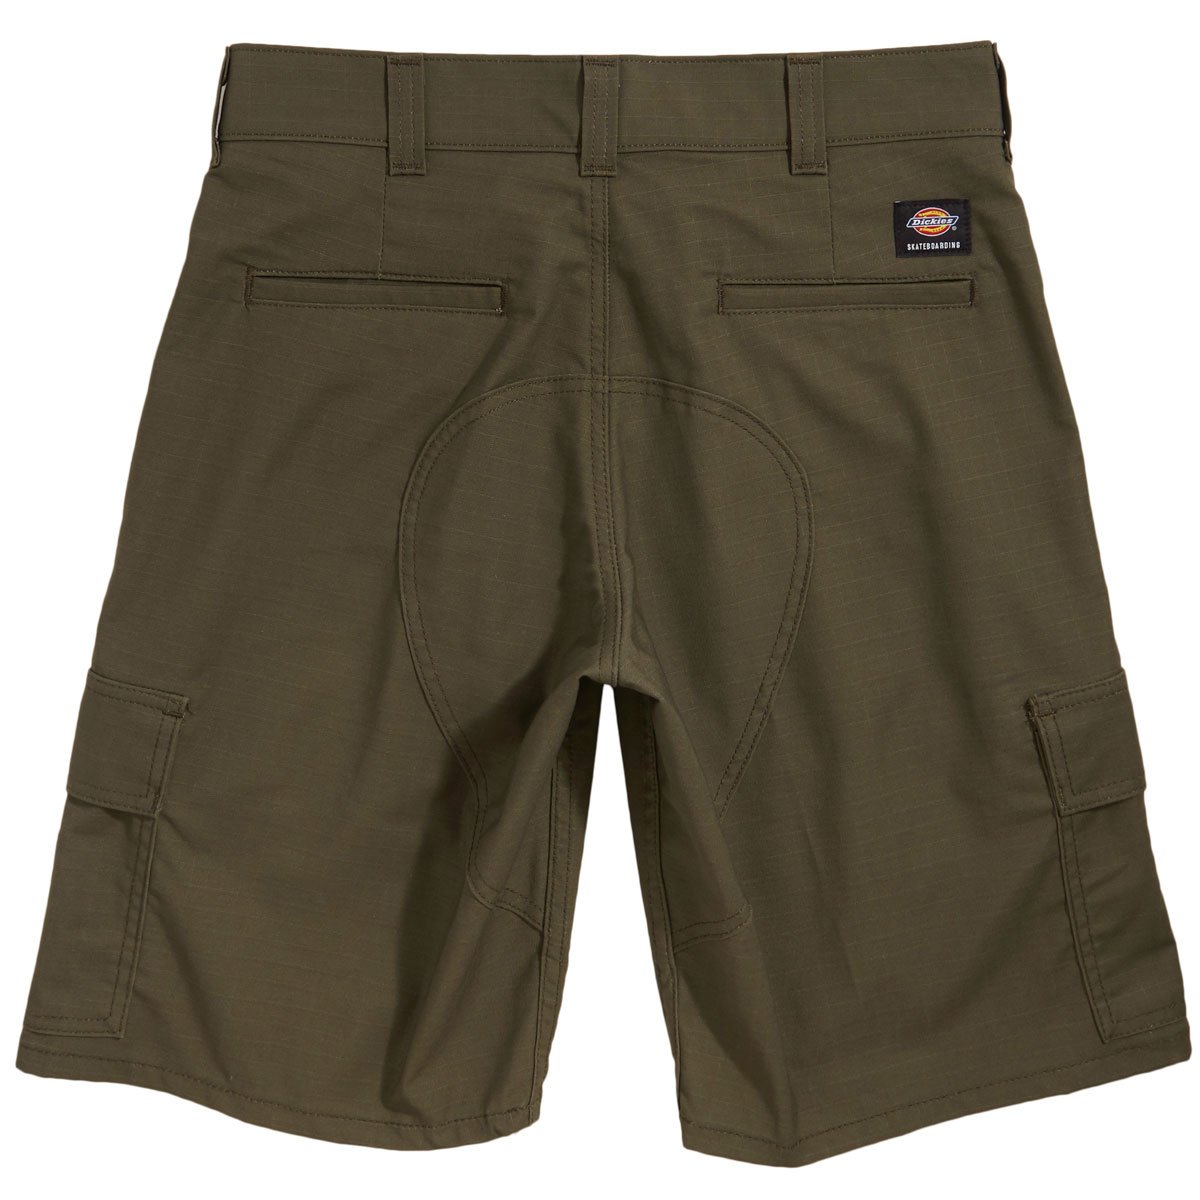 Dickies 67 Collection Cargo Shorts - Moss Green image 2